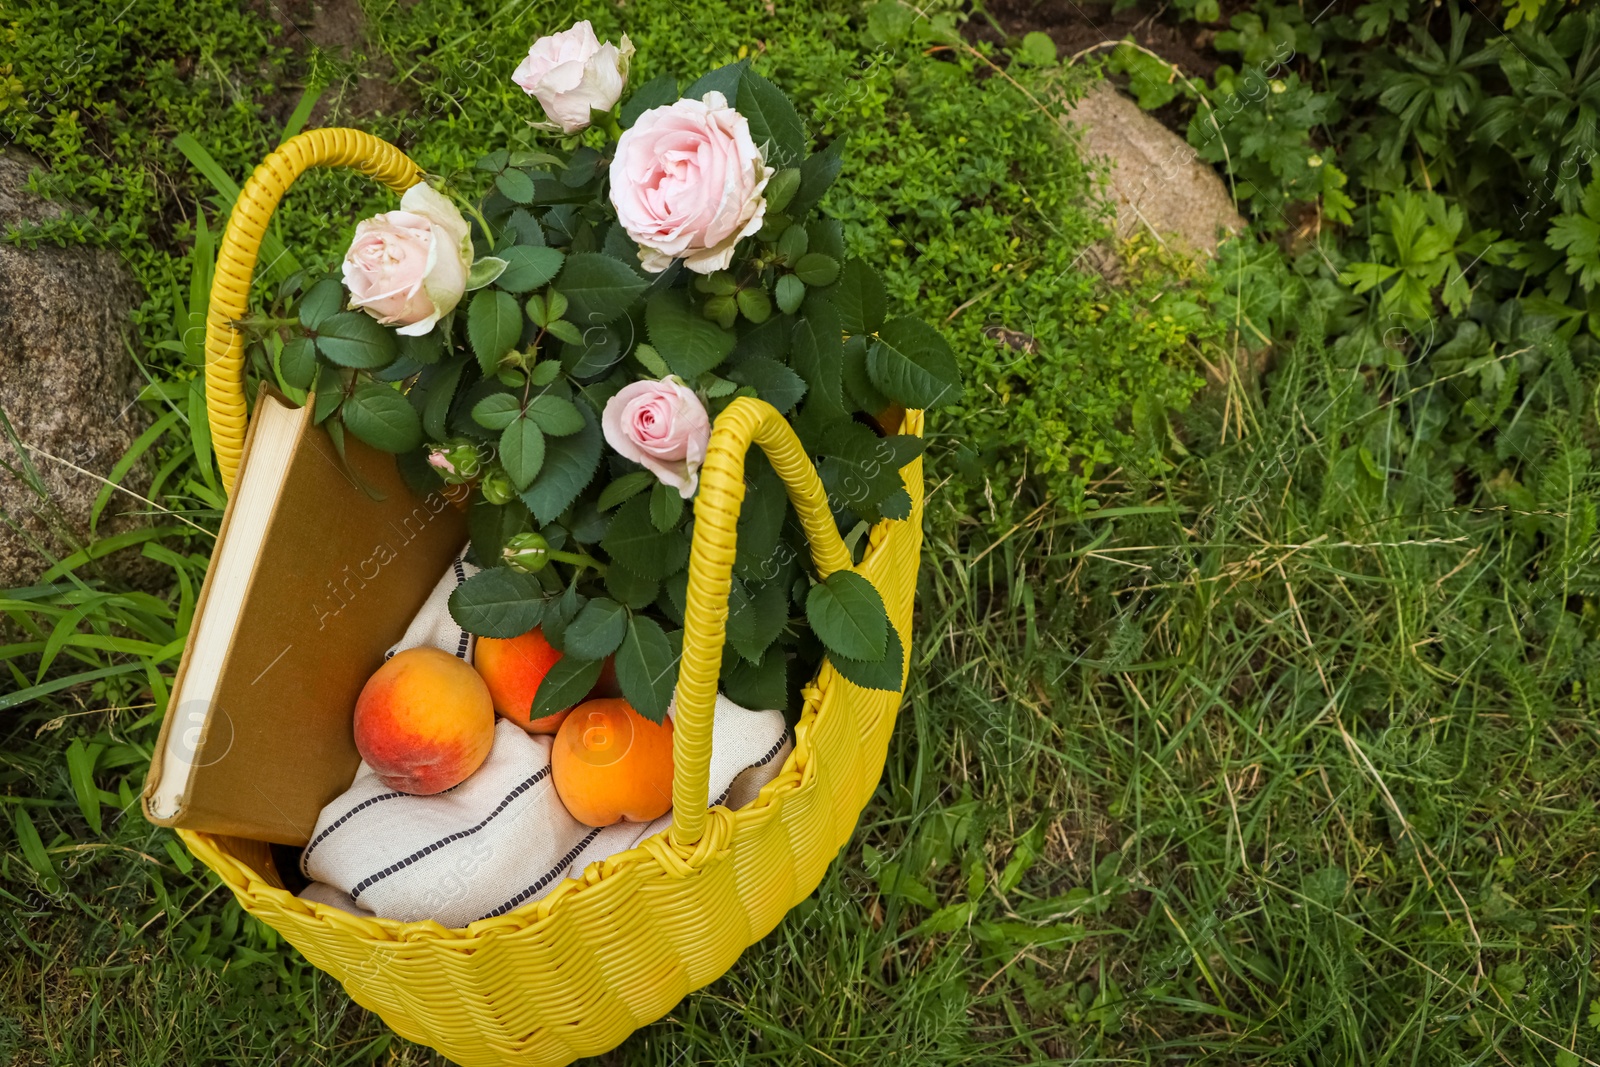 Photo of Yellow wicker bag with roses, book and peaches on green grass outdoors, above view